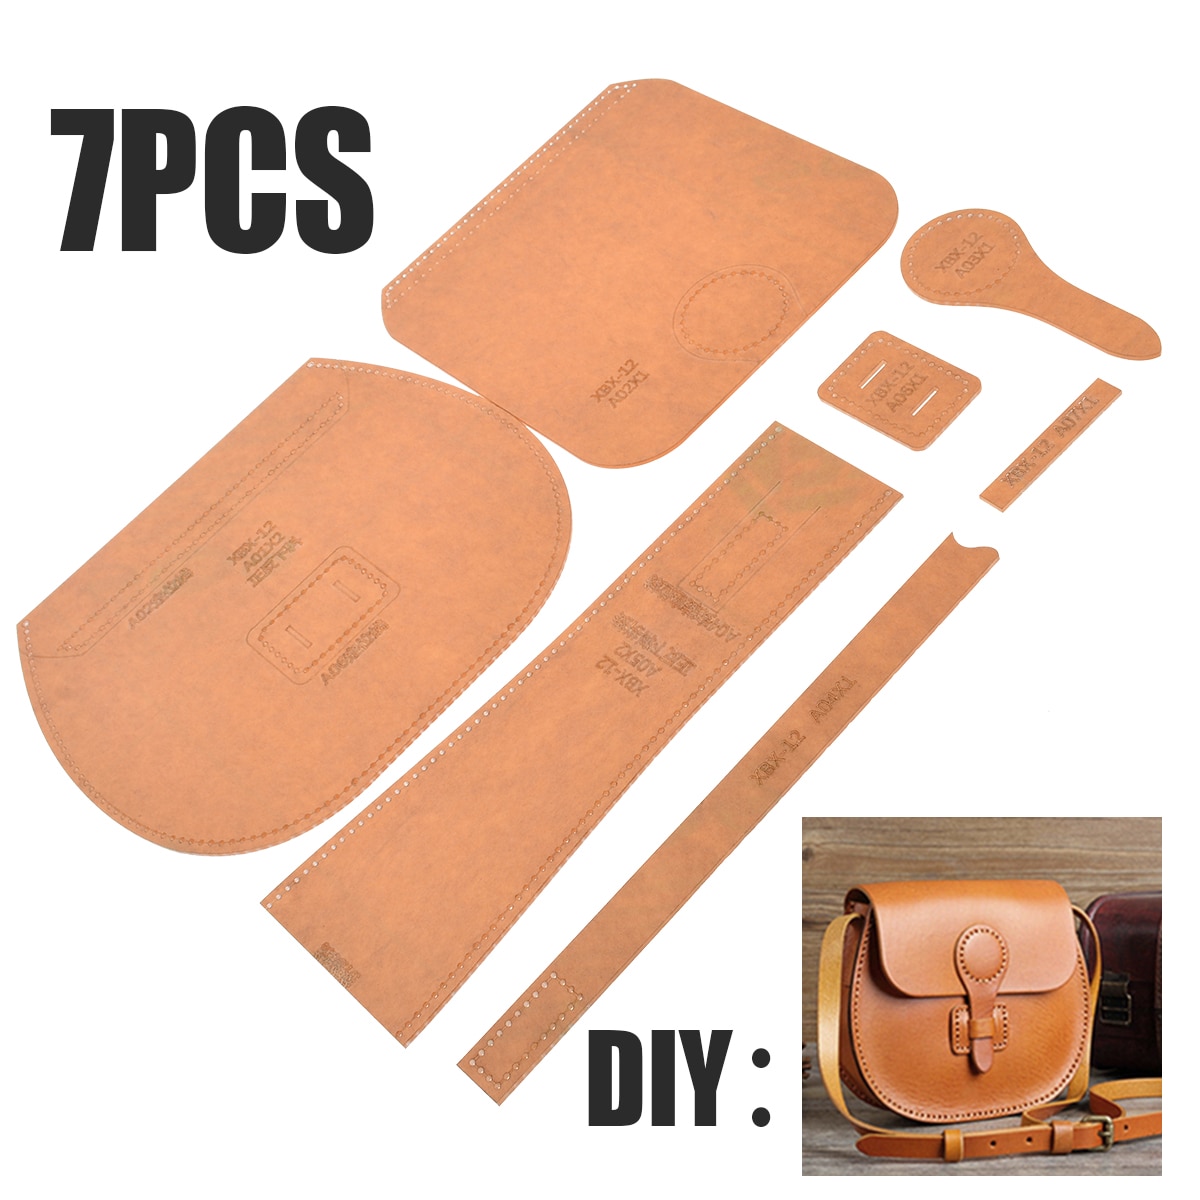 7pcs/set Acrylic Template Pattern Tool For DIY Handmade Handbag Leather Craft Sewing Pattern Sewing Stencils